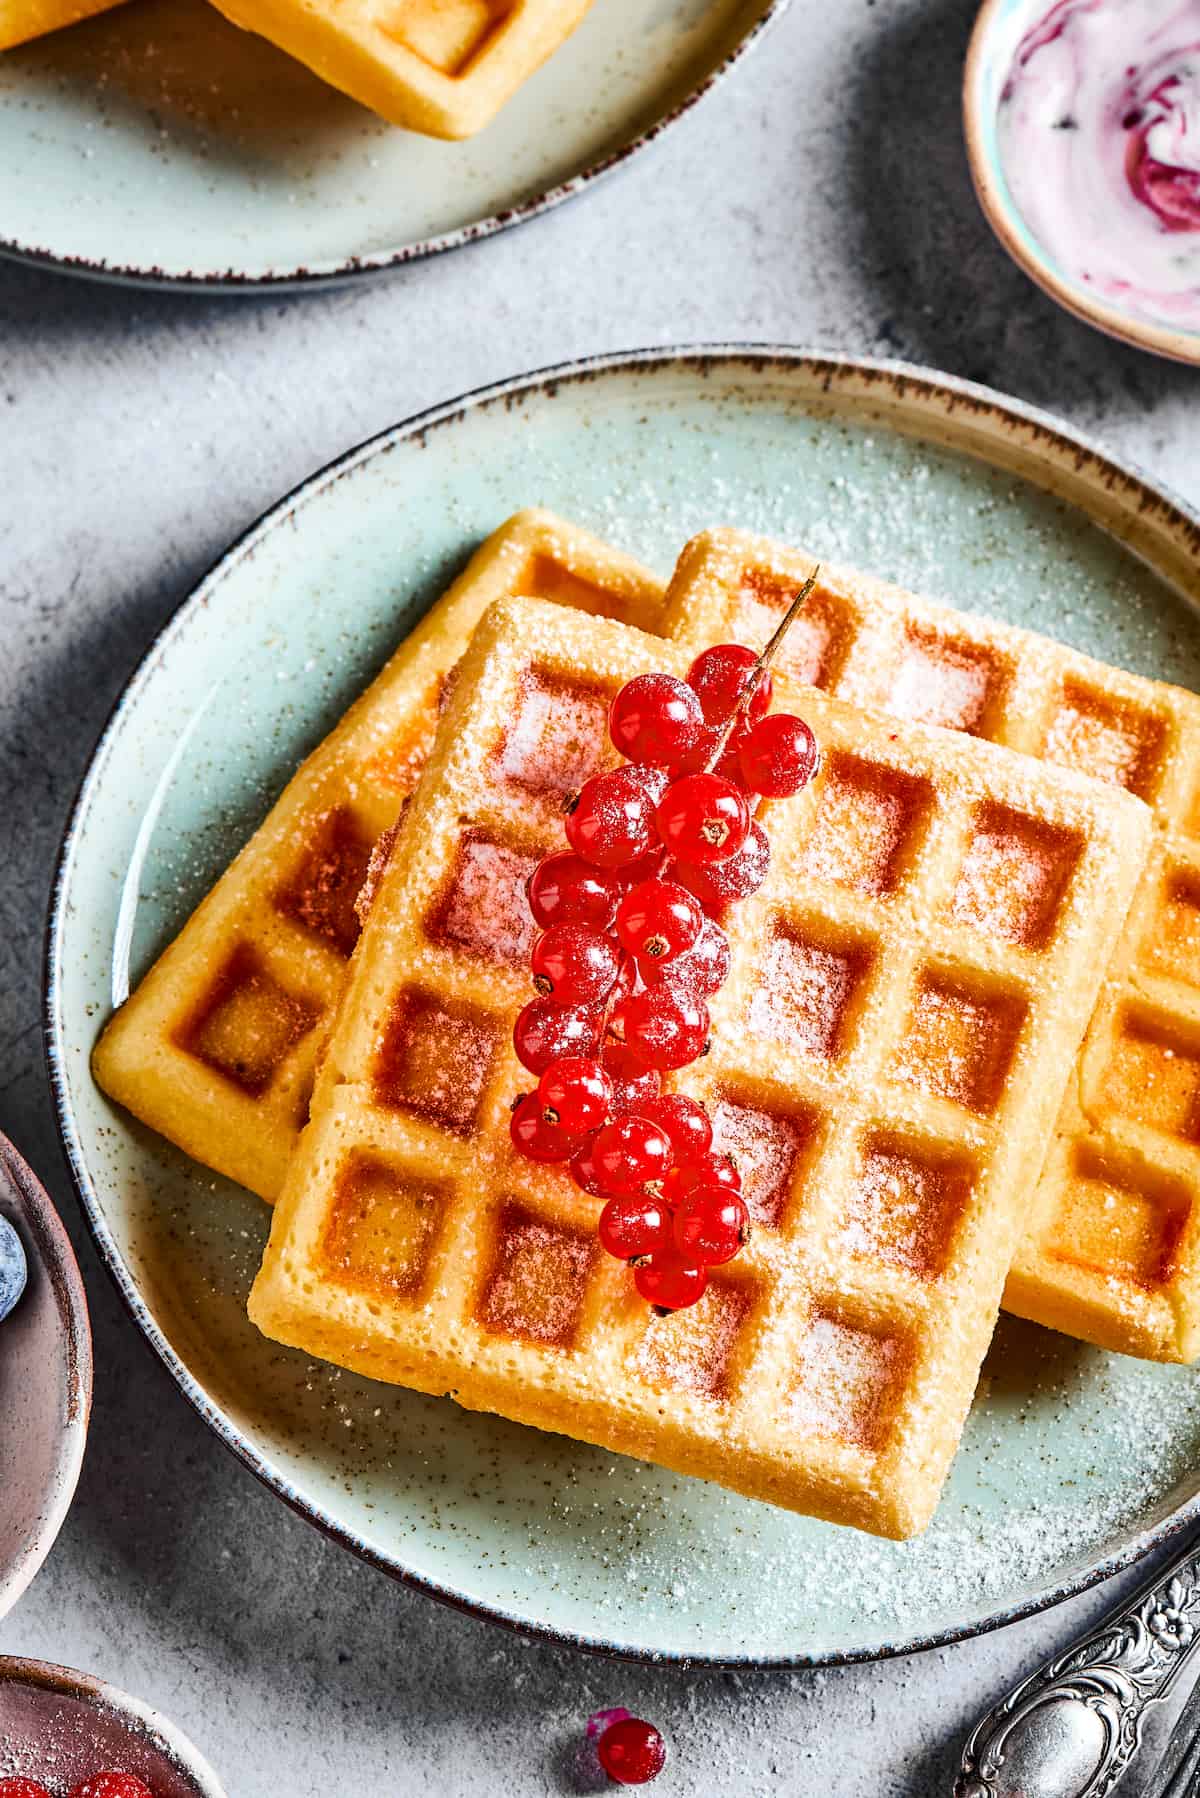 A plate of waffles garnished with fresh currants.